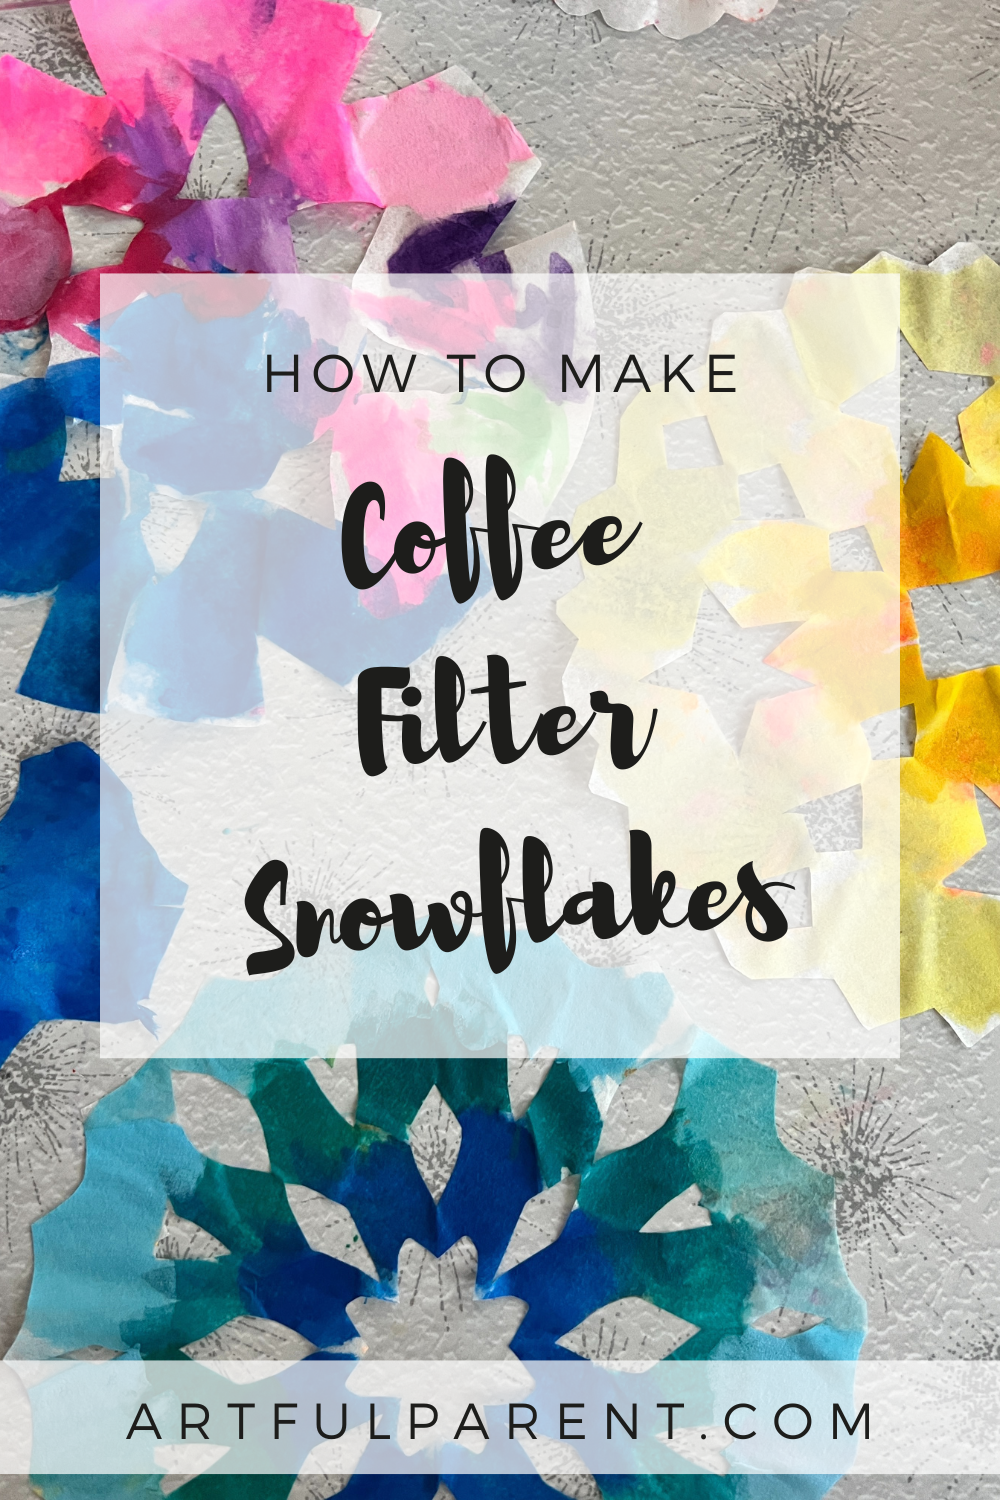 How To Make Snowflakes with Coffee Filters